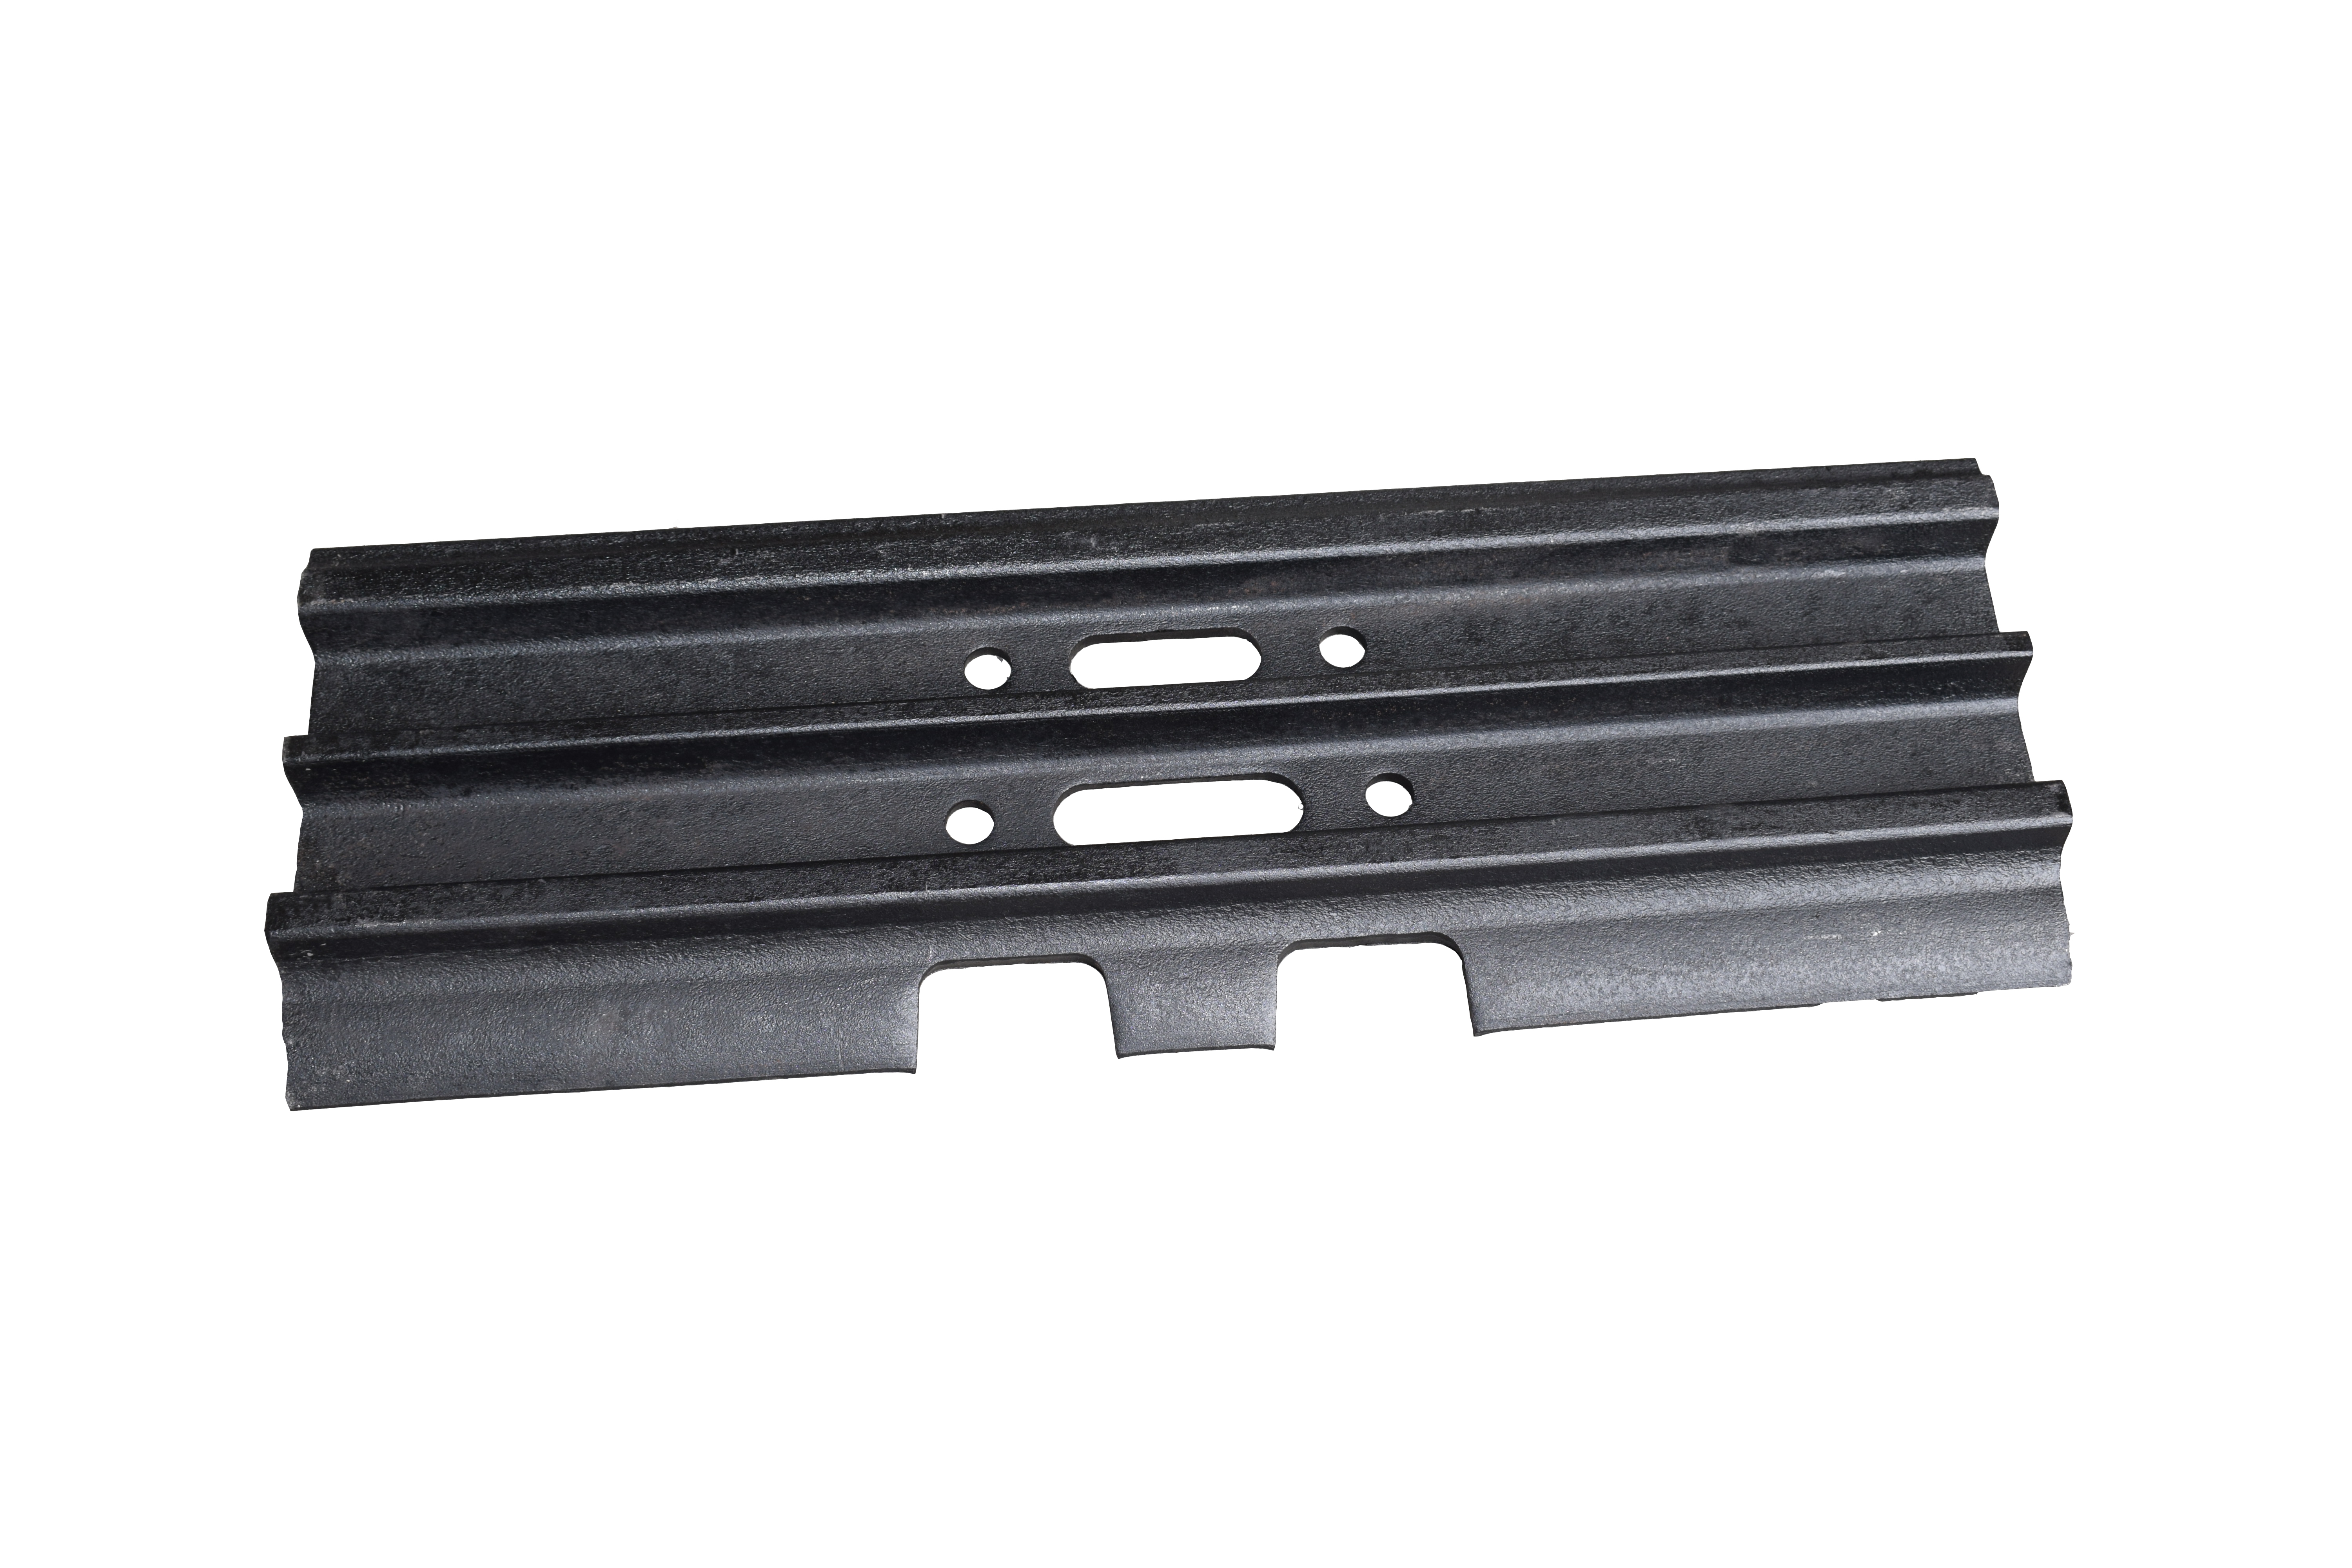 R200 R210-5 Track Shoe undercarriage parts